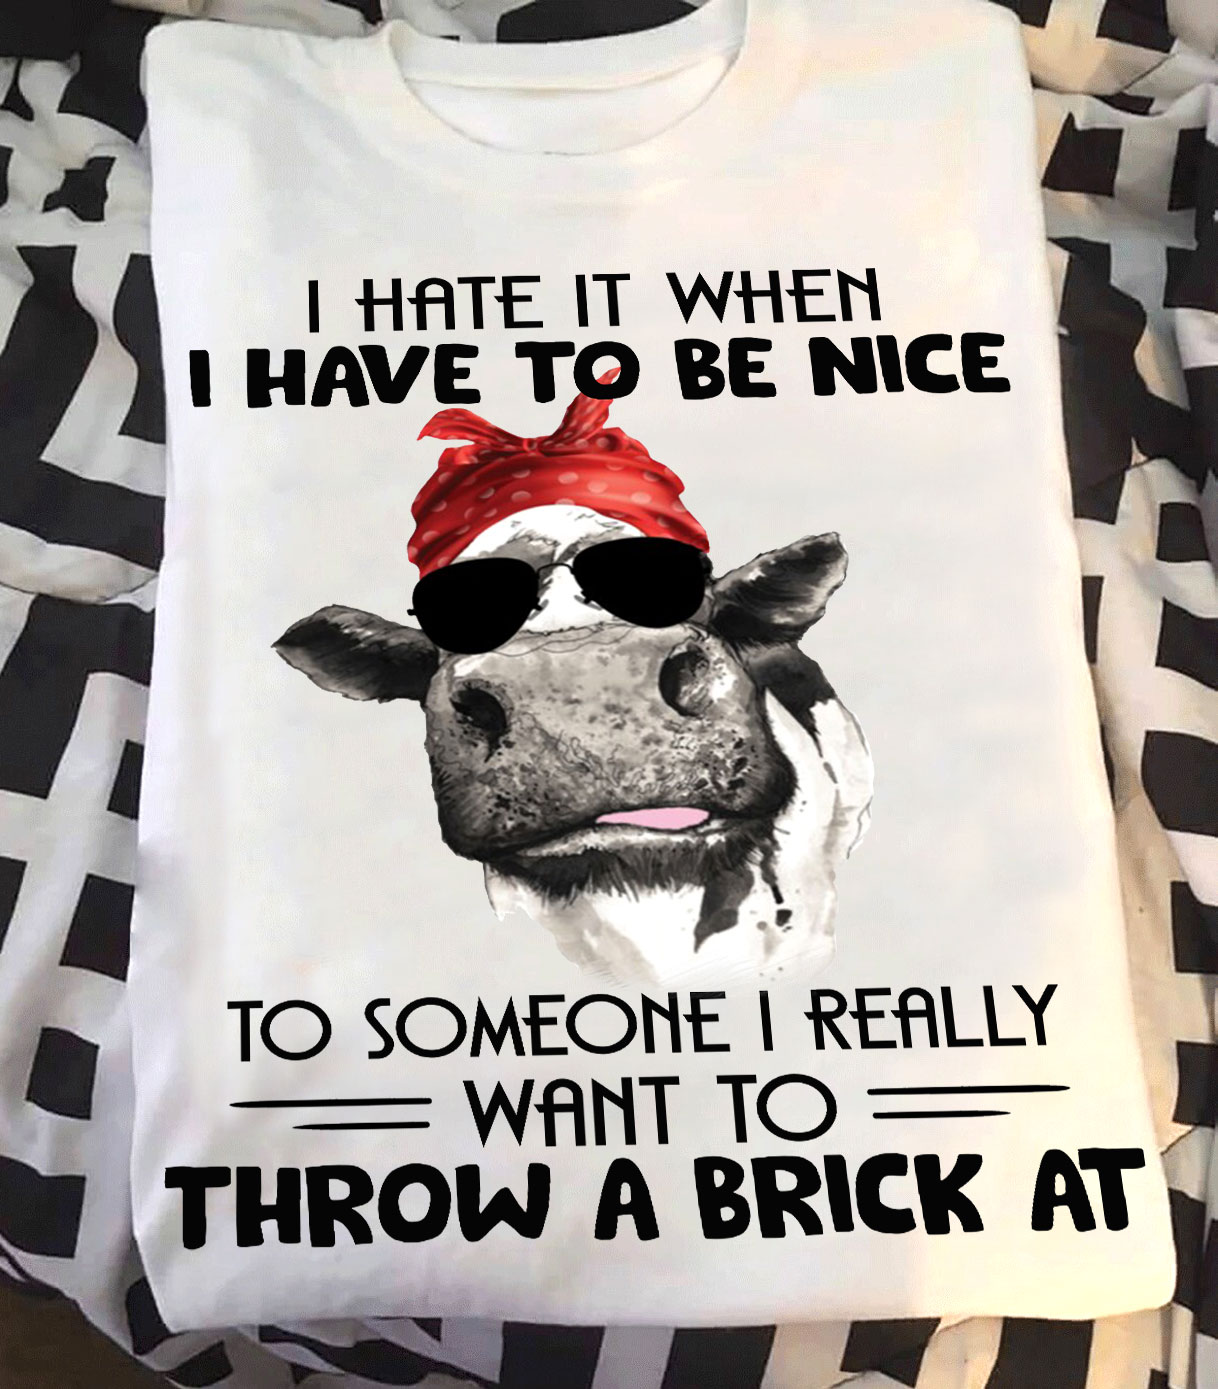 I hate it when I have to be nice to someone I really want to throw a brick at - Grumpy cow